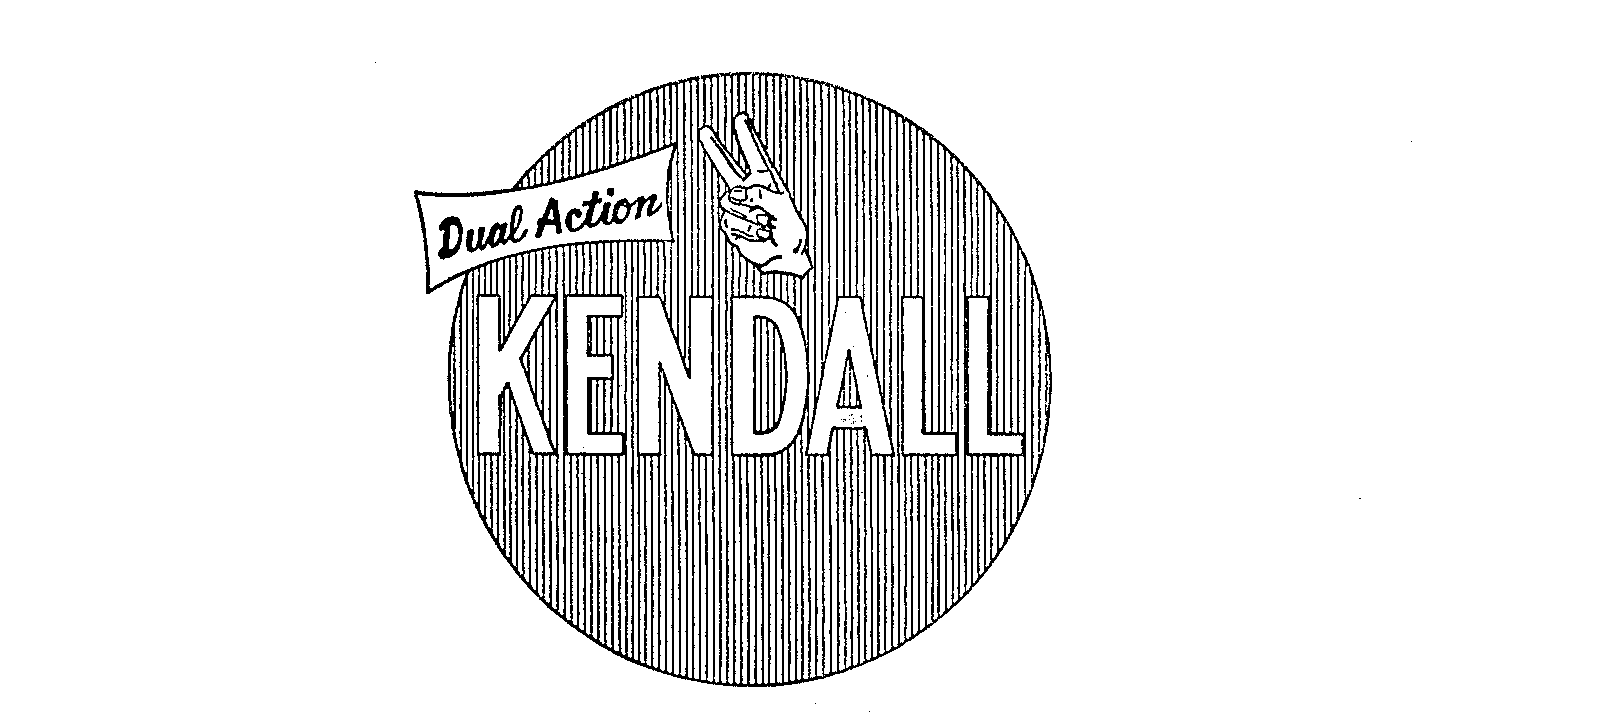  DUAL ACTION KENDALL